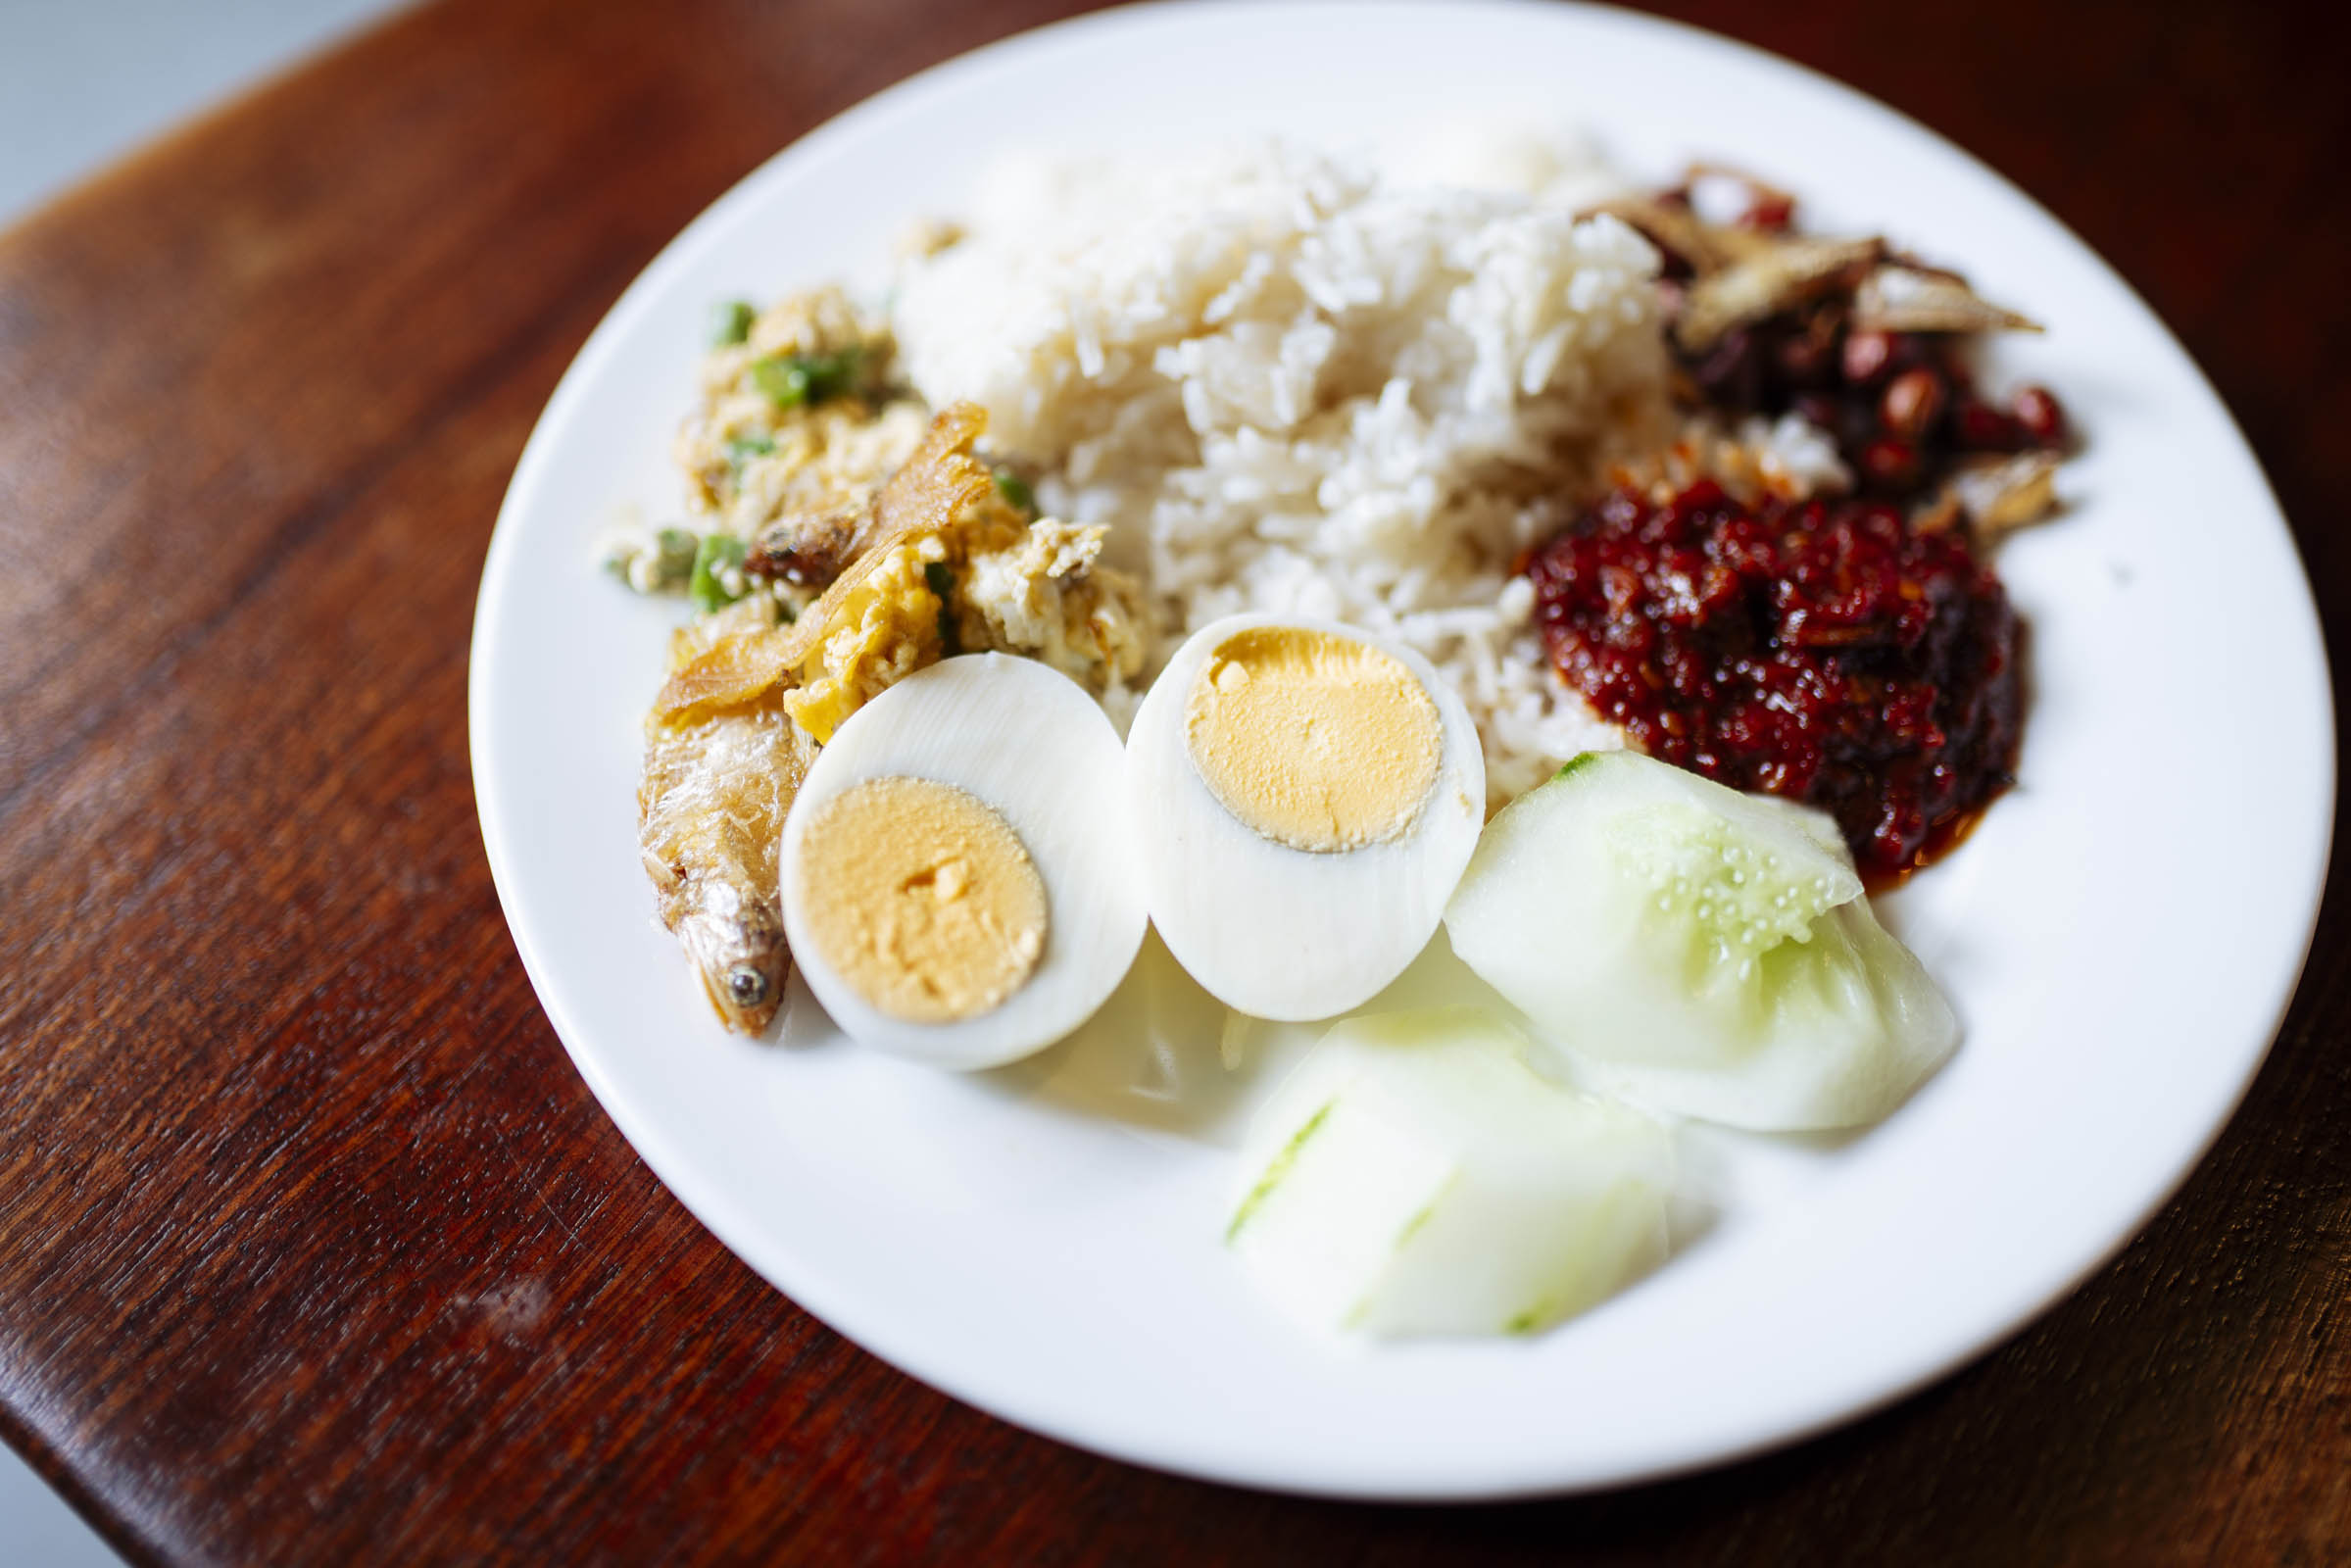 Nasi lemak at Adeline Villa and Rest House. Photo by Teoh Eng Hooi.